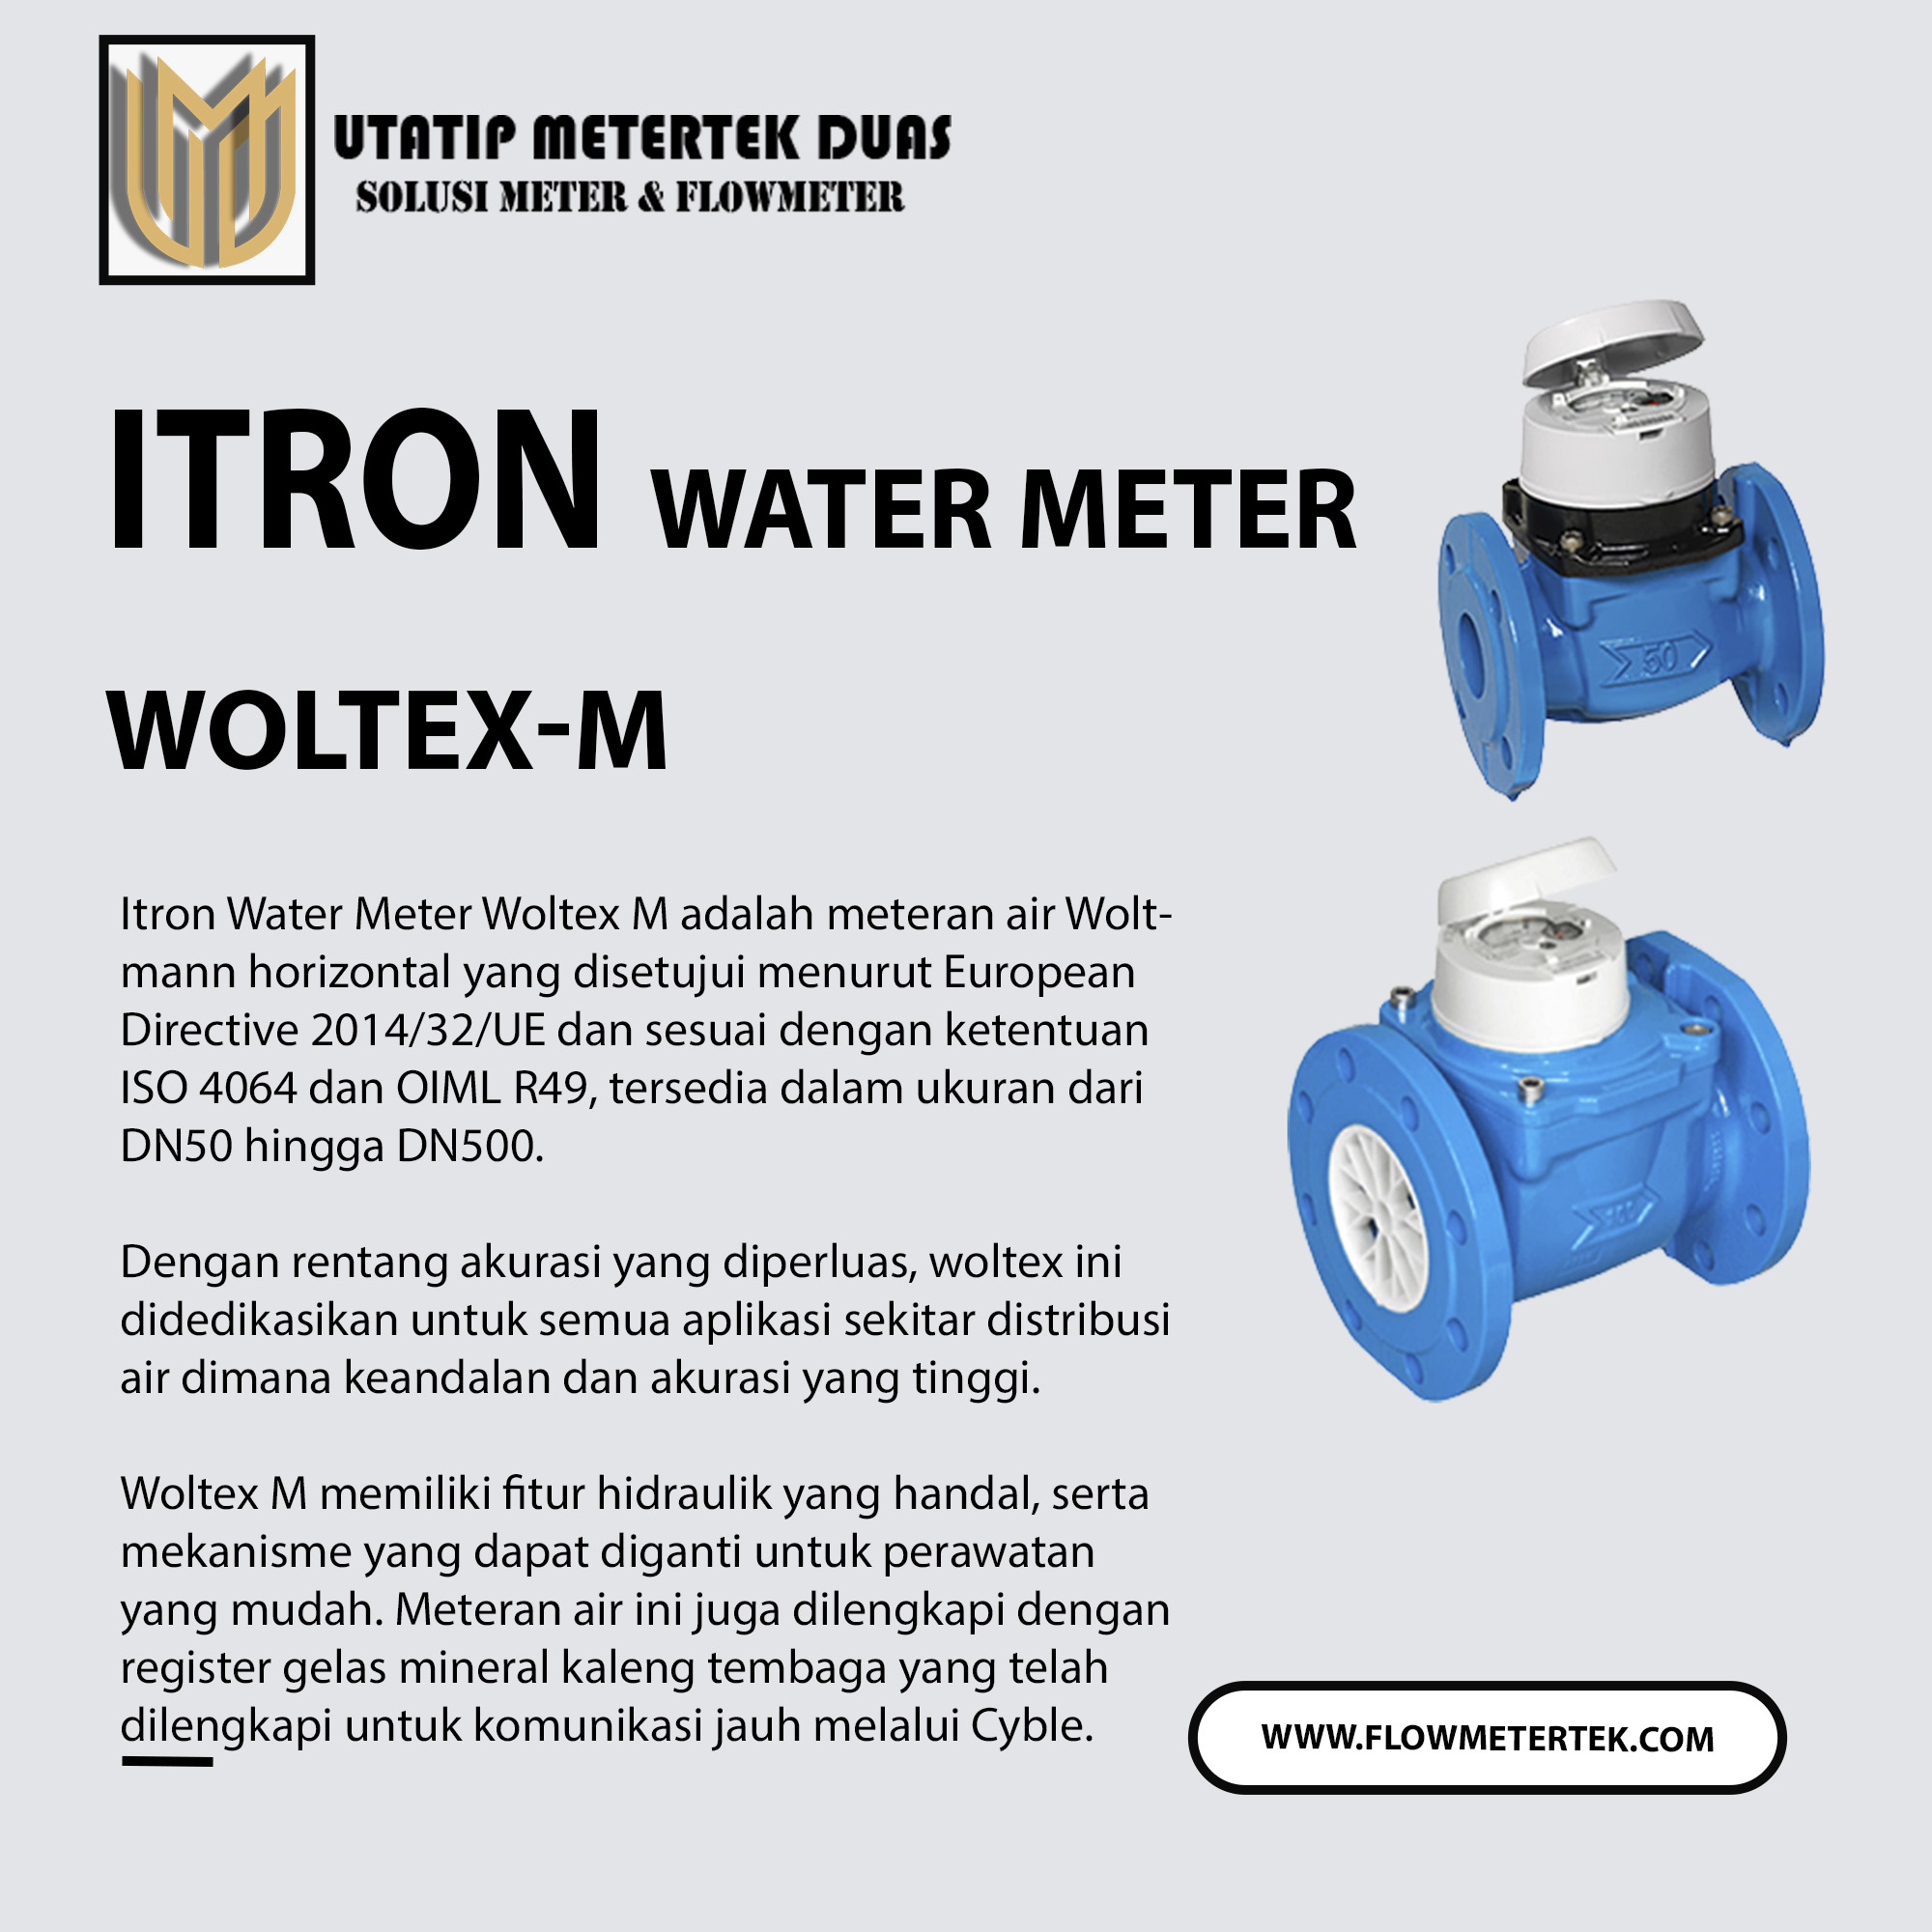 Itron Water Meter Woltex-M